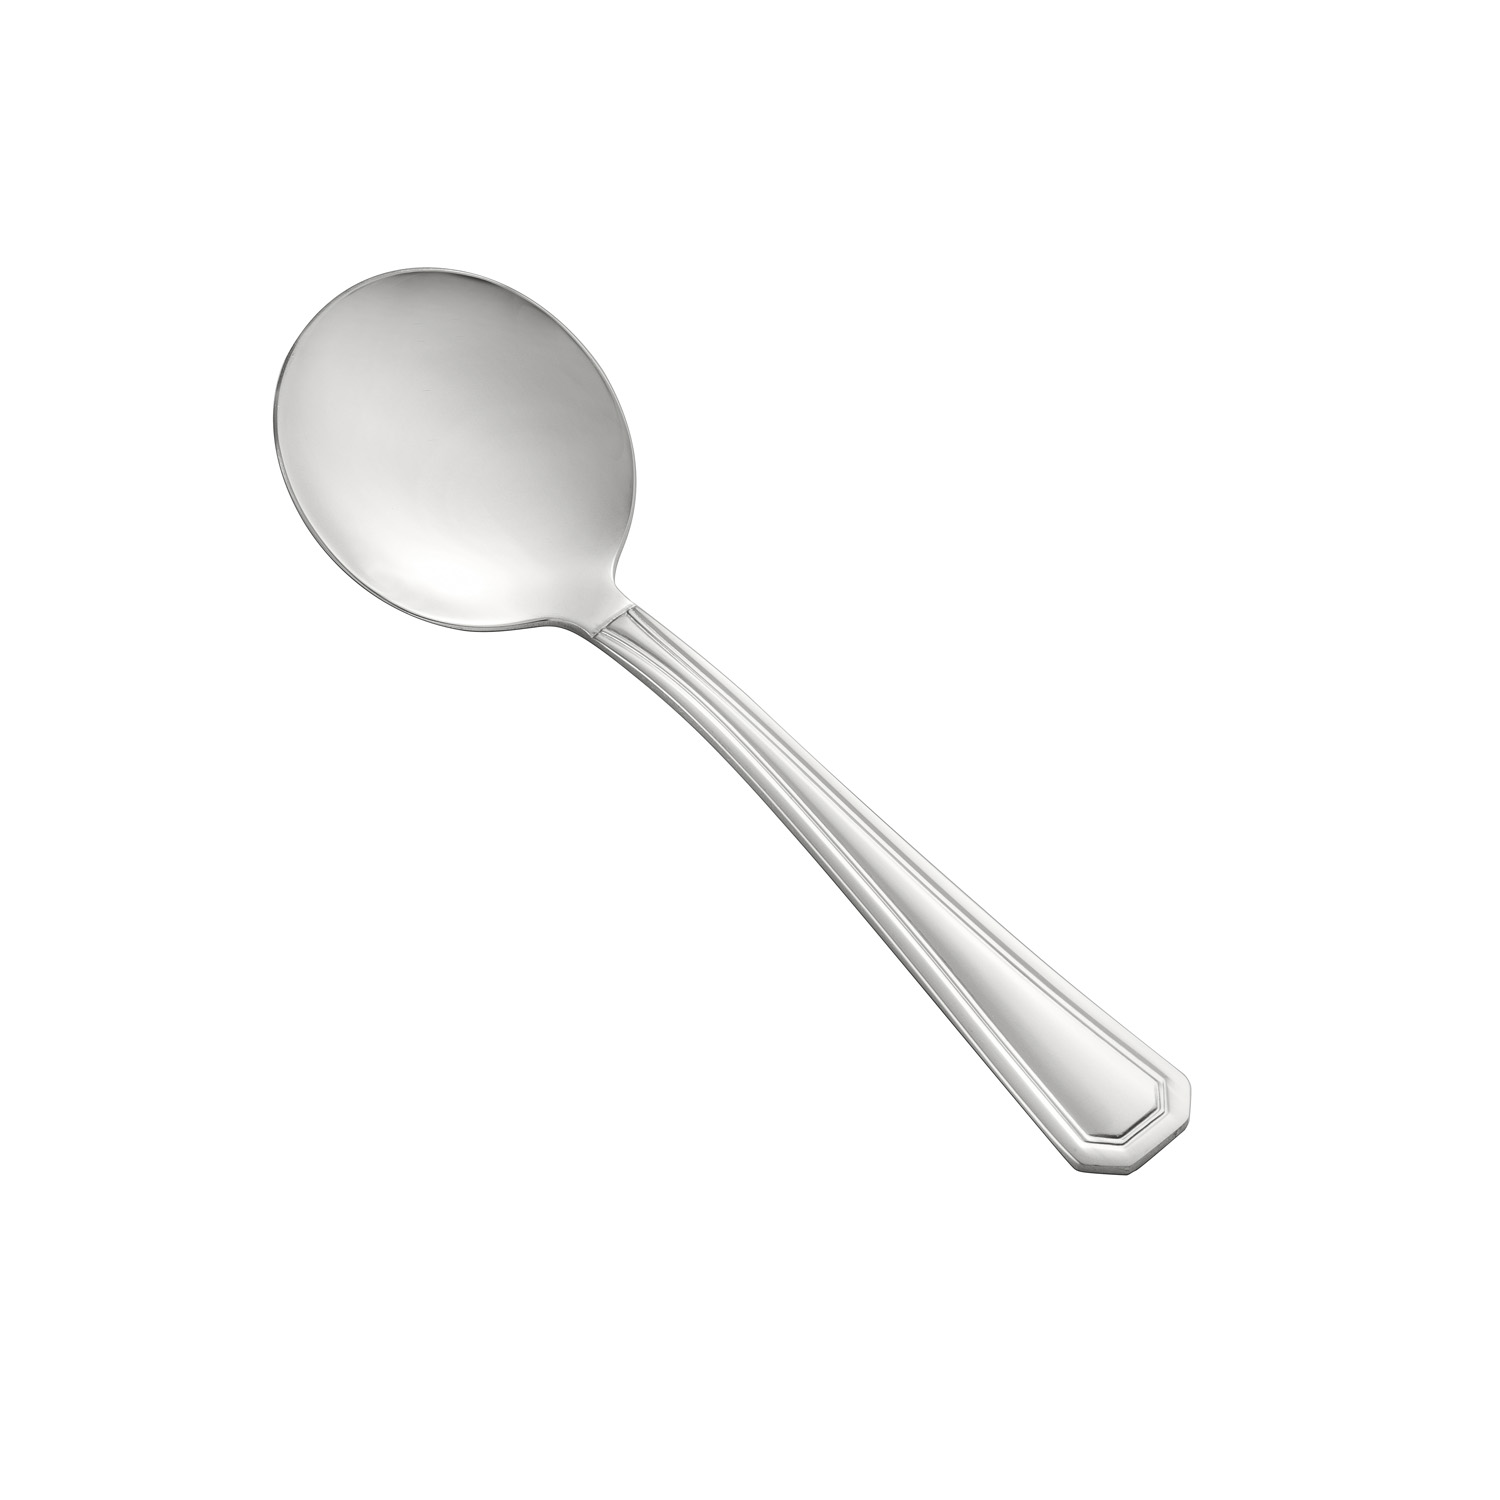 CAC China 8006-04 Lux Bouillon Spoon, Extra Heavyweight 18/8, 5 7/8"